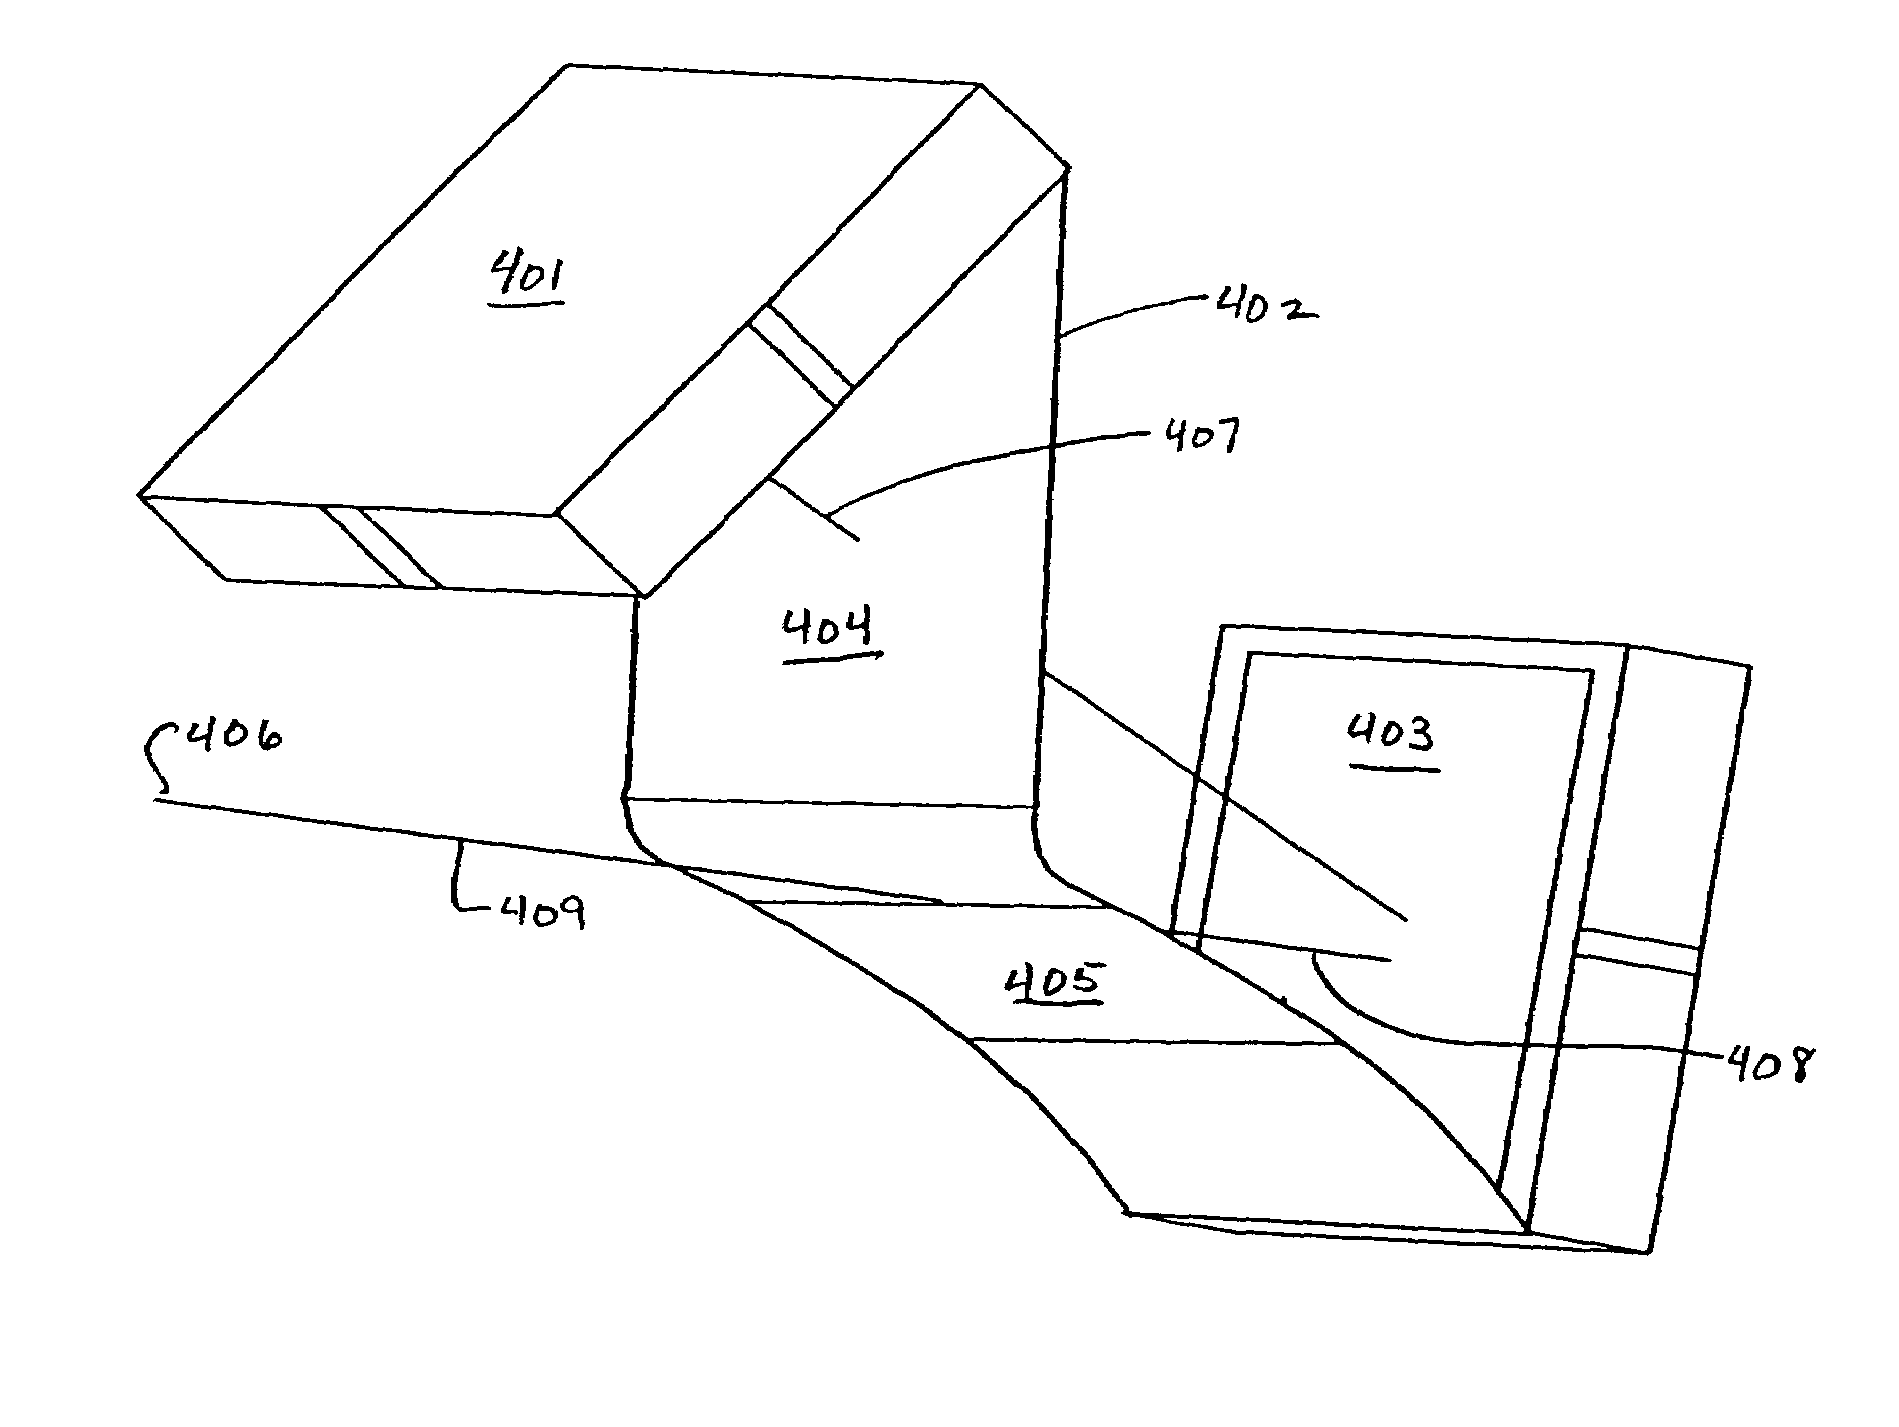 Virtual mosaic wide field of view display system